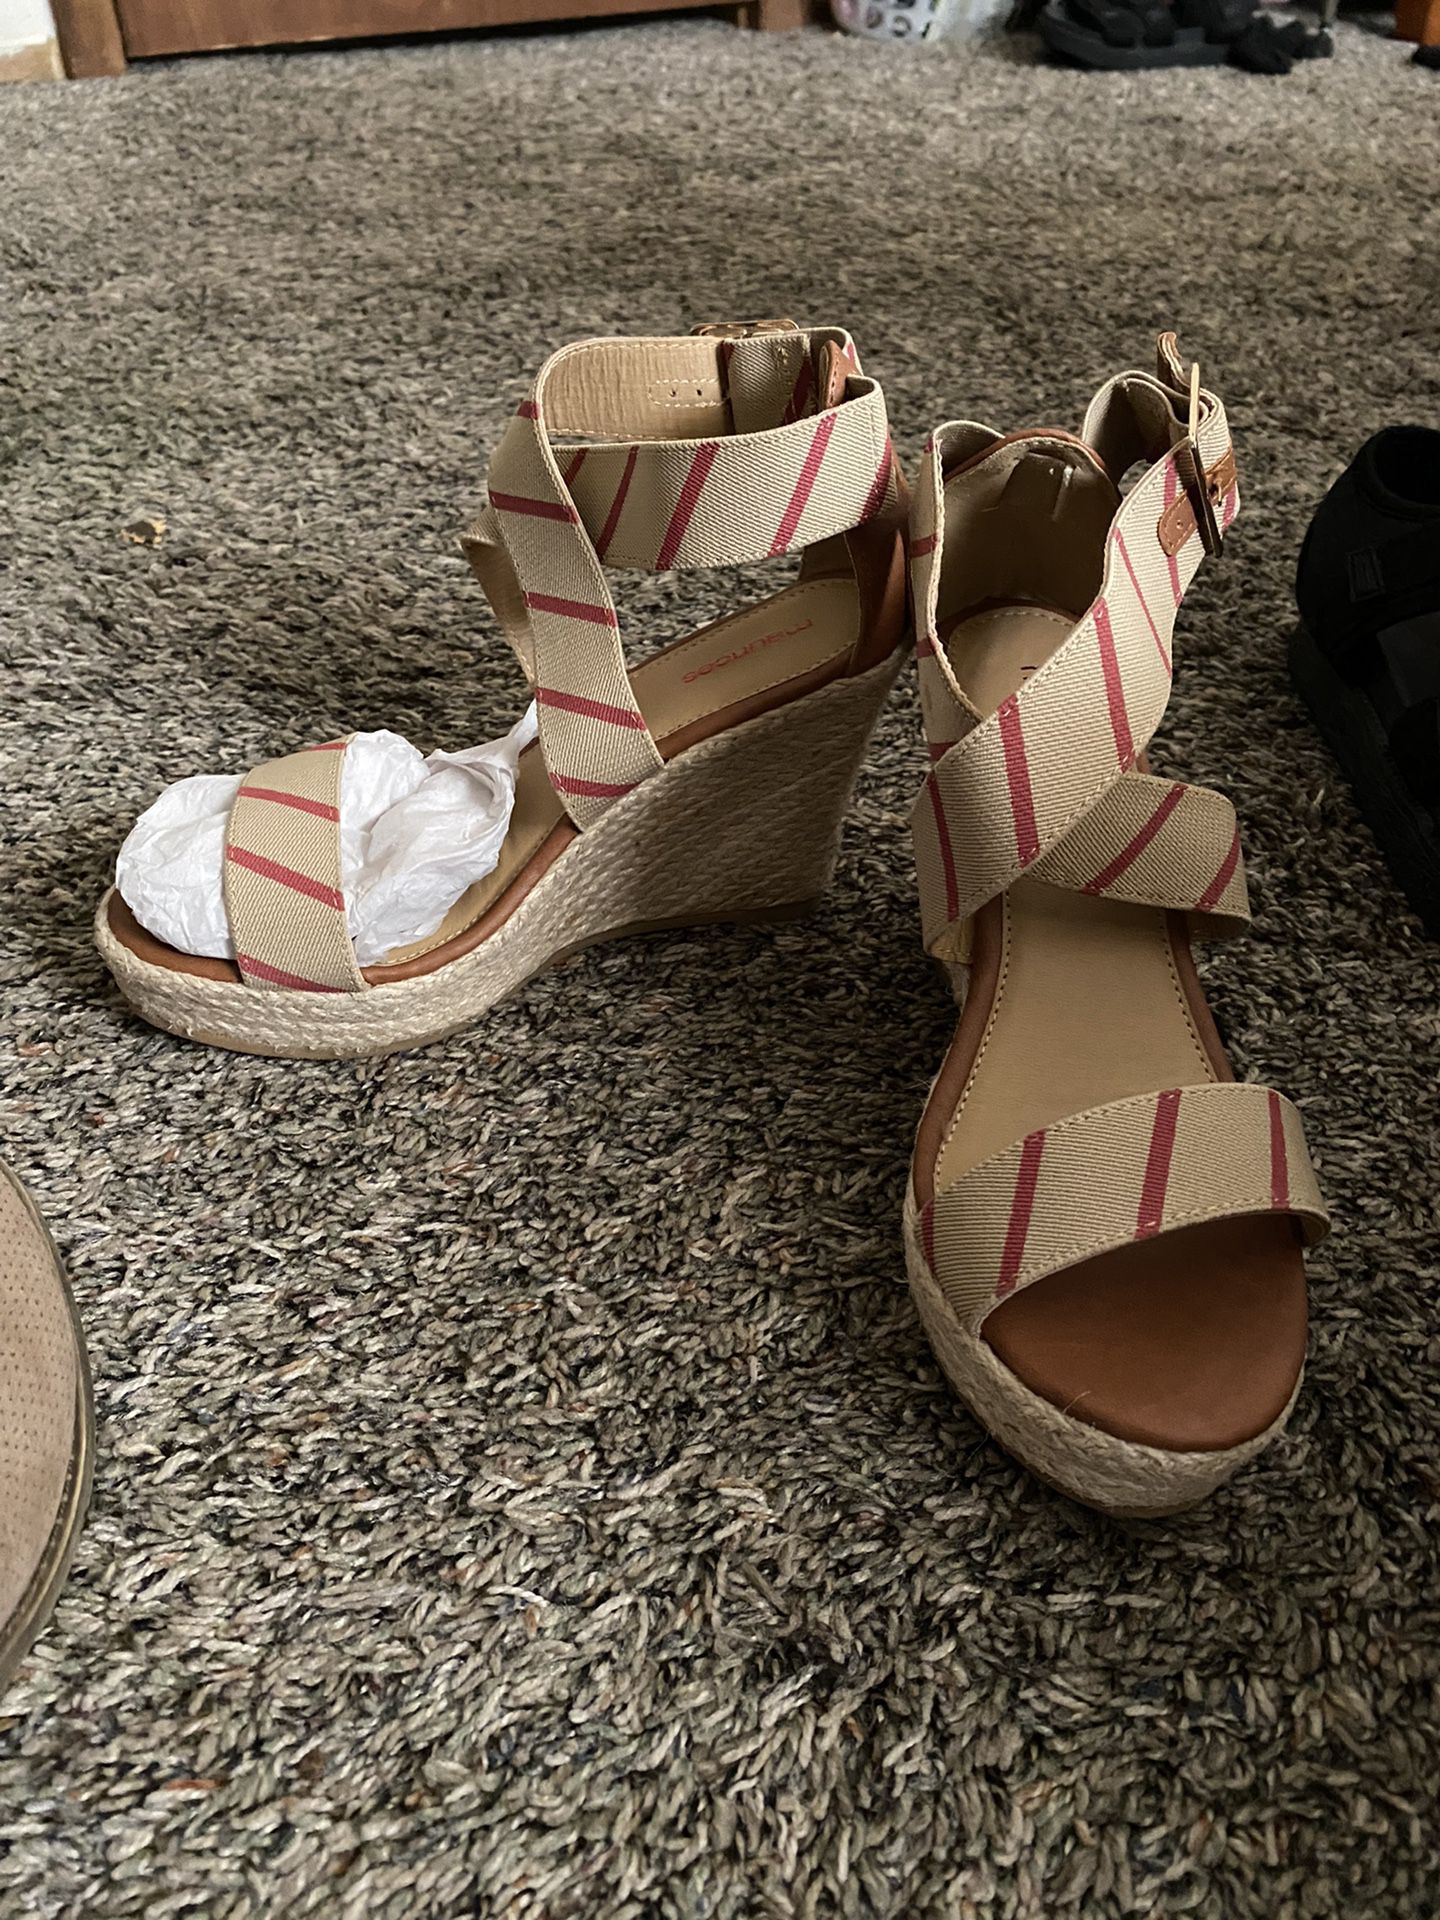 Brand New Wedges From Maurices